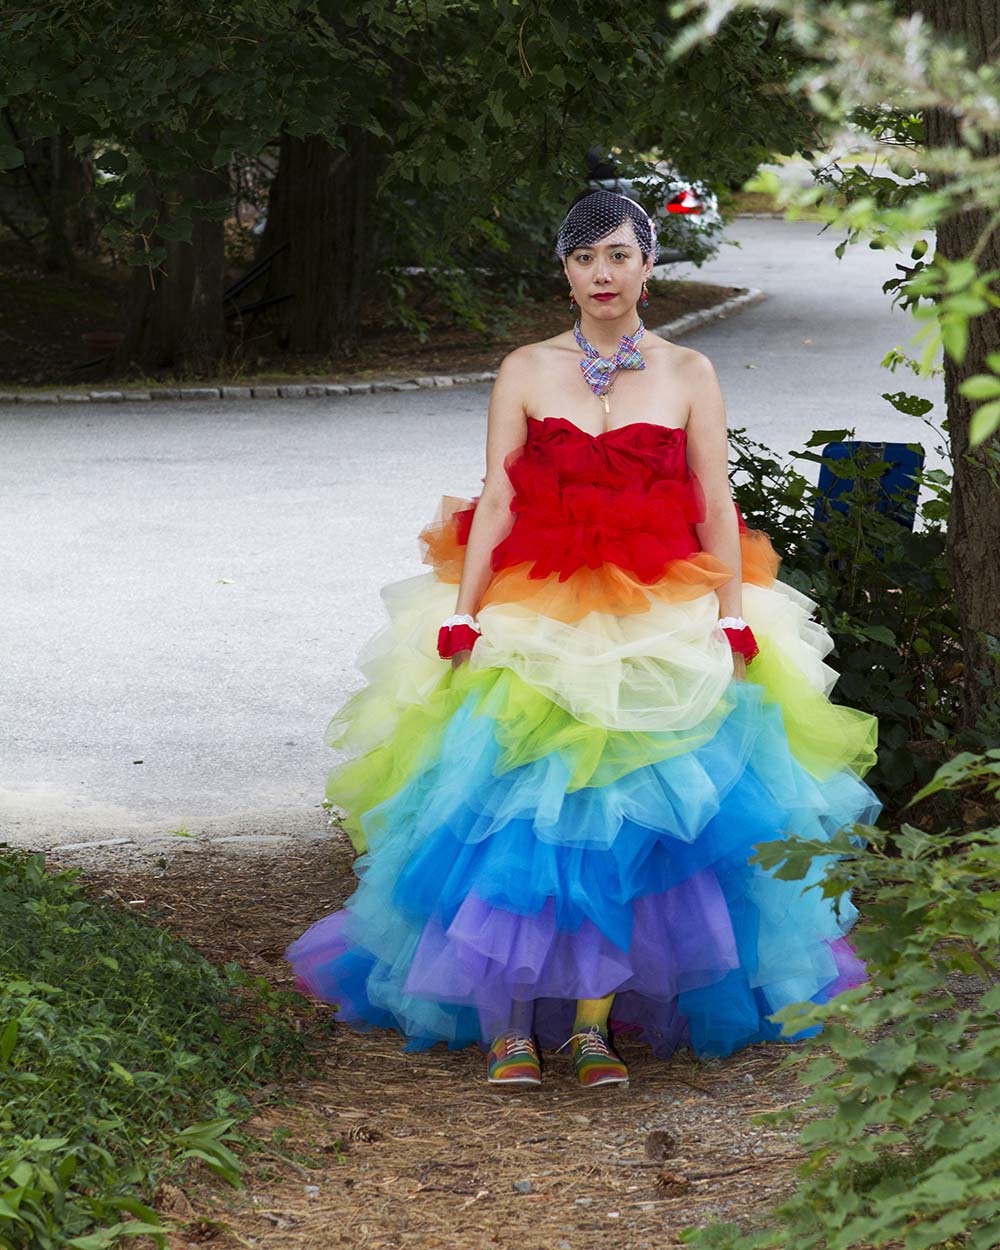 The Best Rainbow Wedding Dress Looks for Every Style